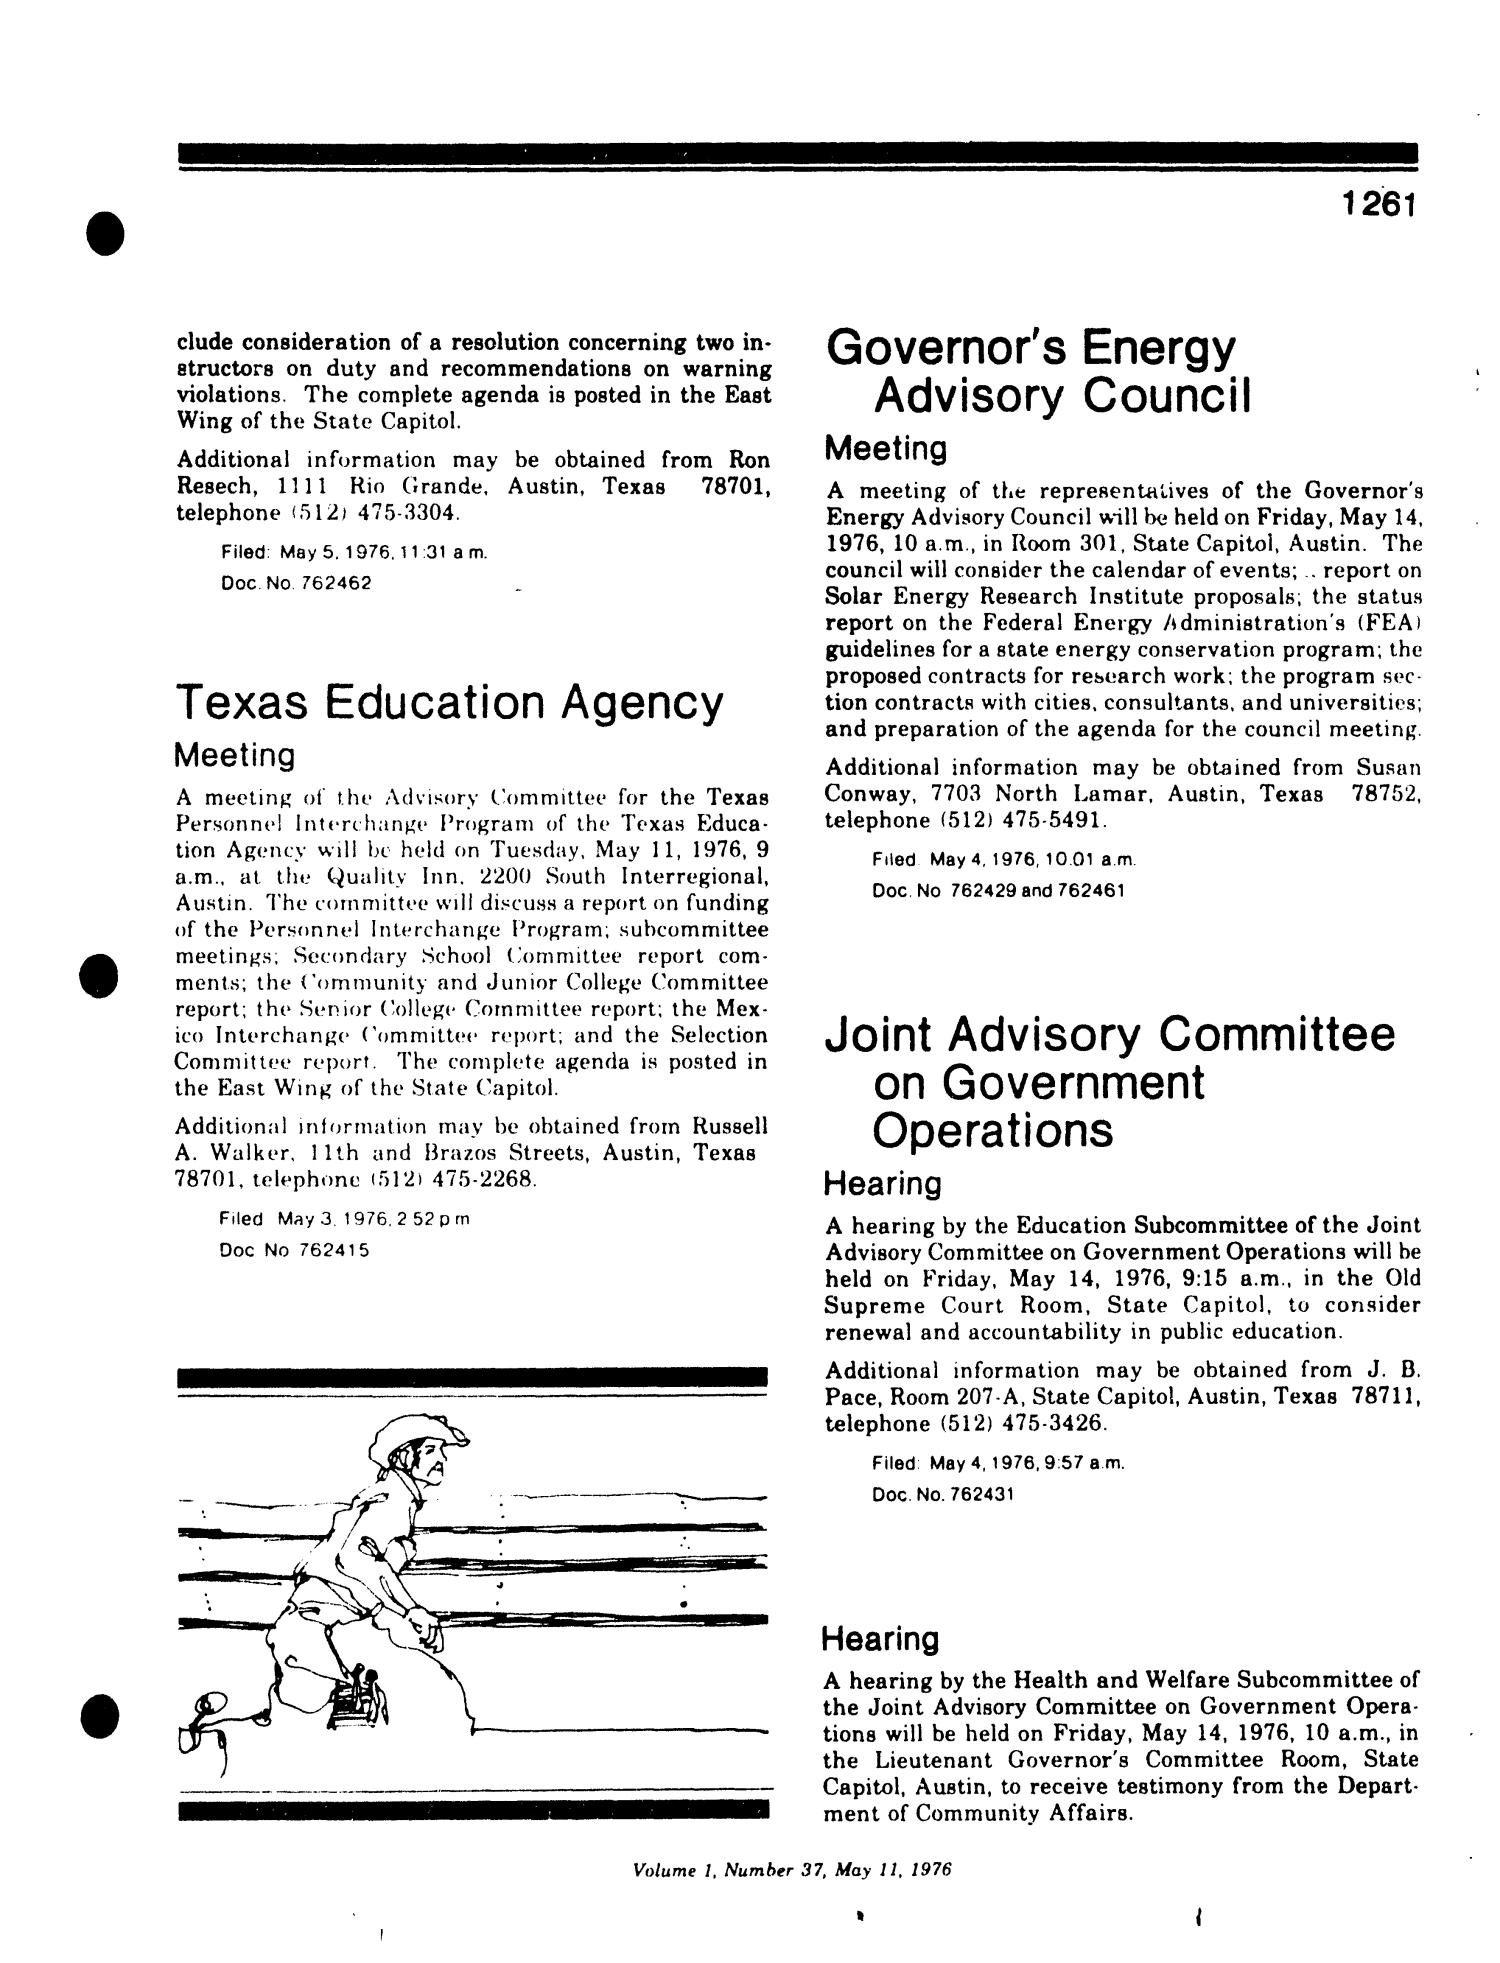 Texas Register, Volume 1, Number 37, Pages 1237-1276, May 11, 1976
                                                
                                                    1261
                                                